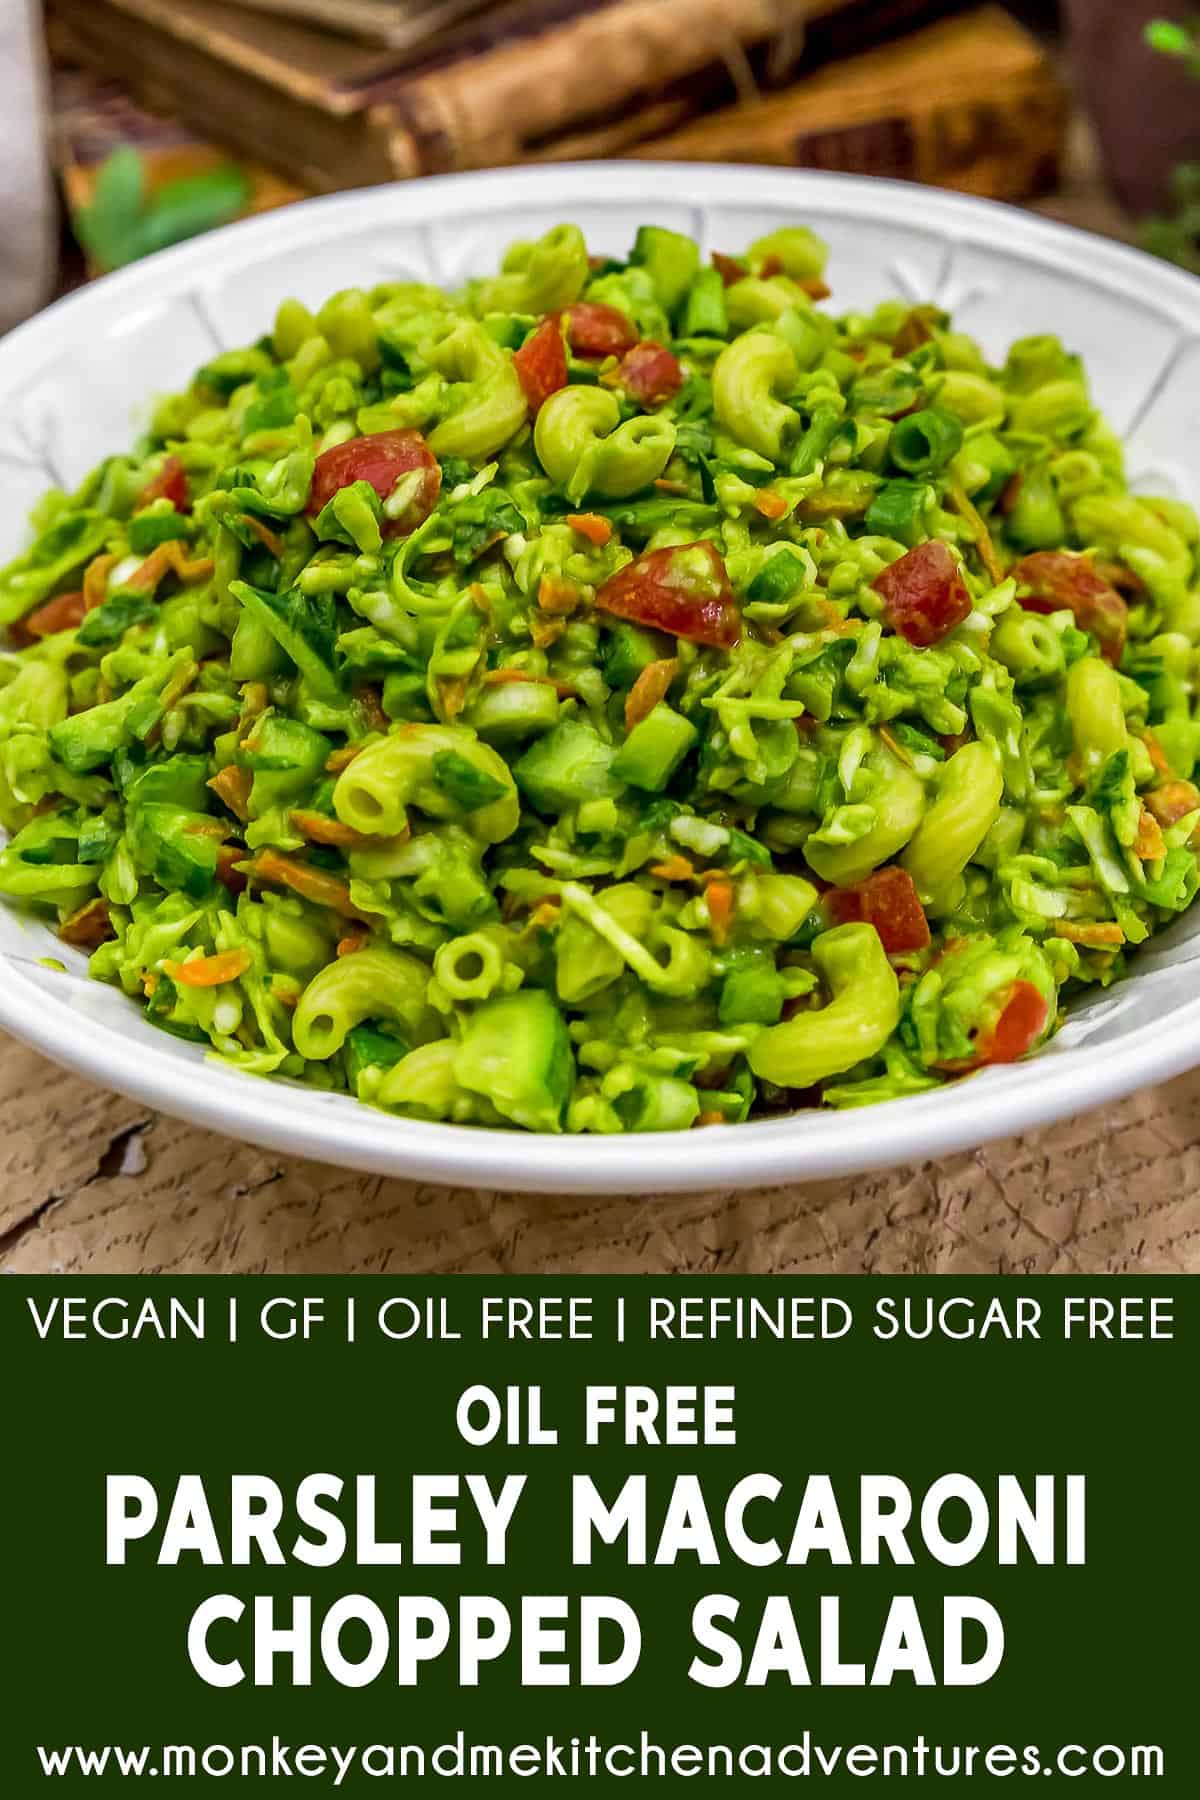 Oil Free Parsley Macaroni Chopped Salad with Text Description